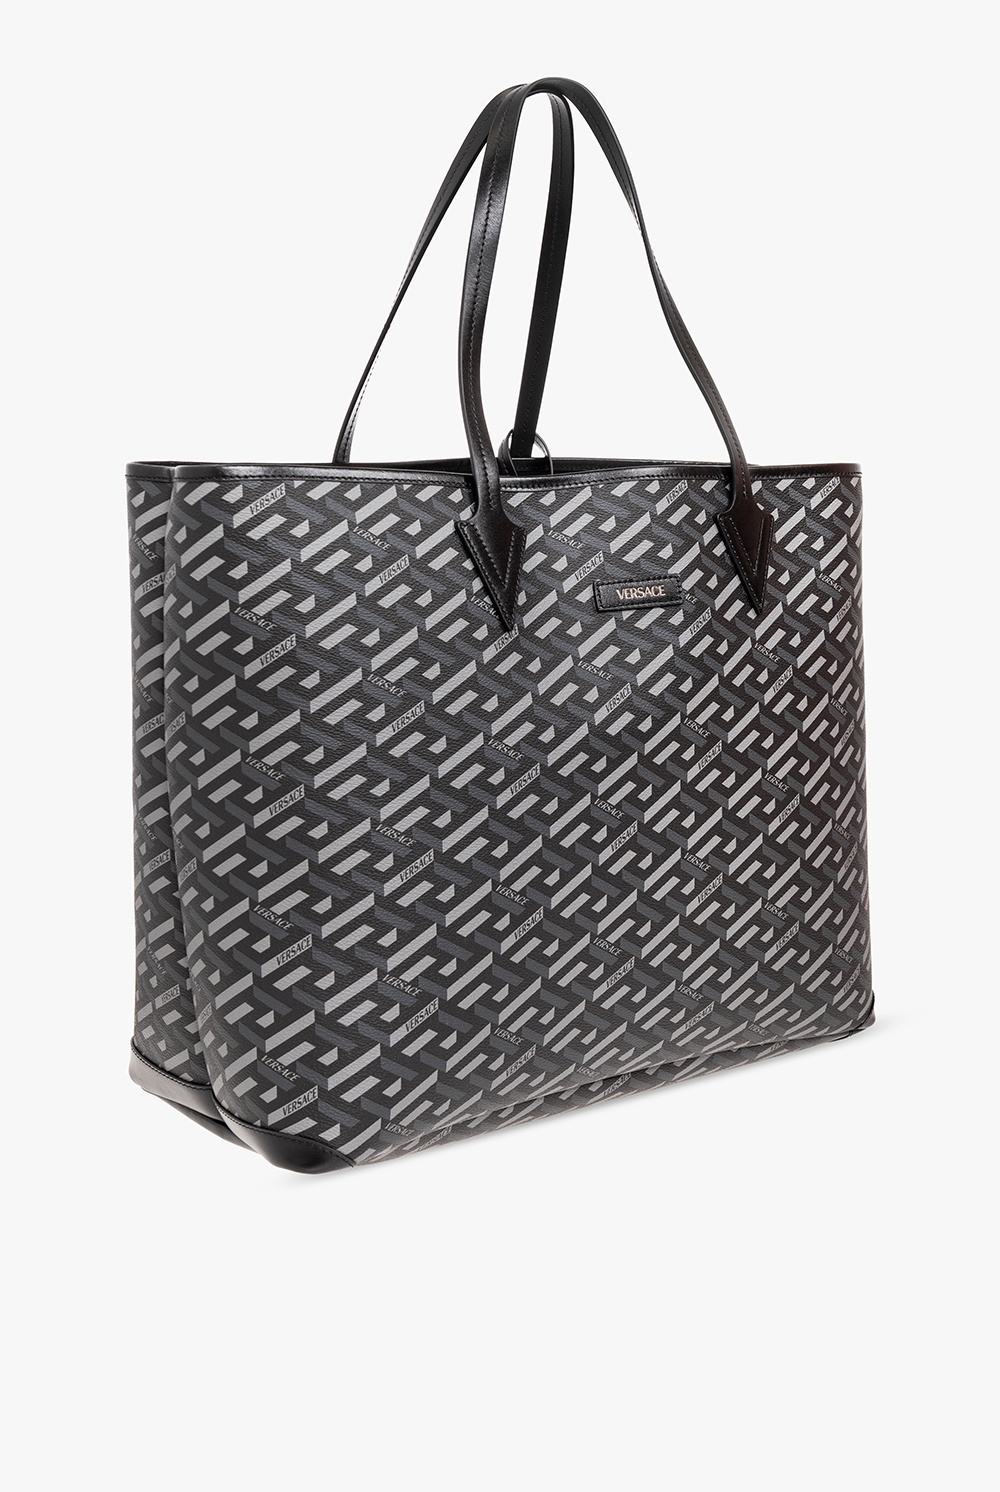 Versace Shopper bag | Slanted hand pockets on front feature mesh 